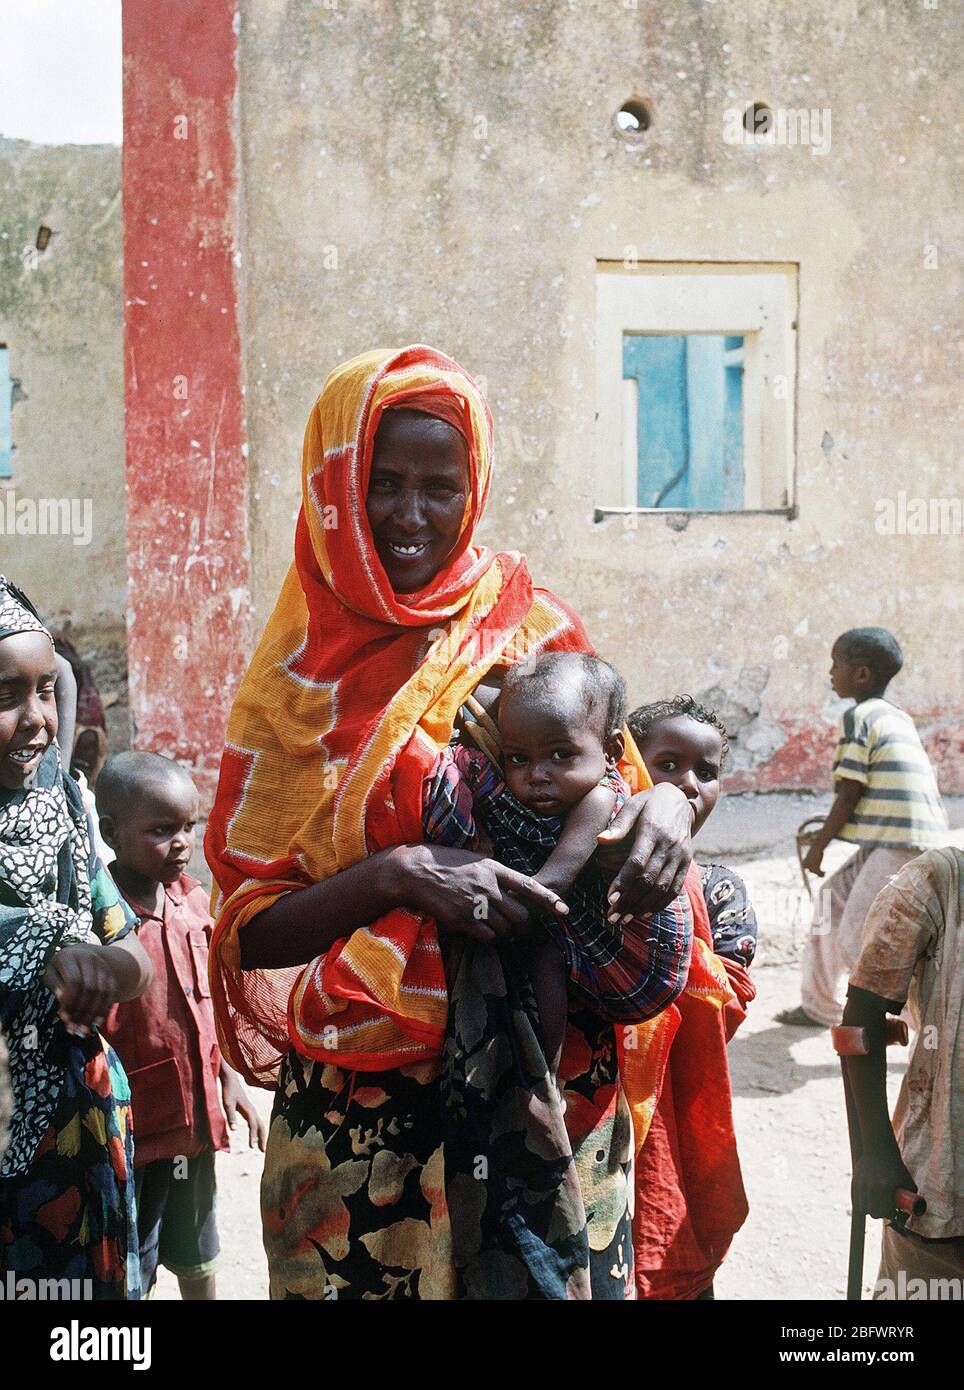 1993 - A Somali woman poses with some children during the multinational relief effort Operation Restore Hope. Stock Photo